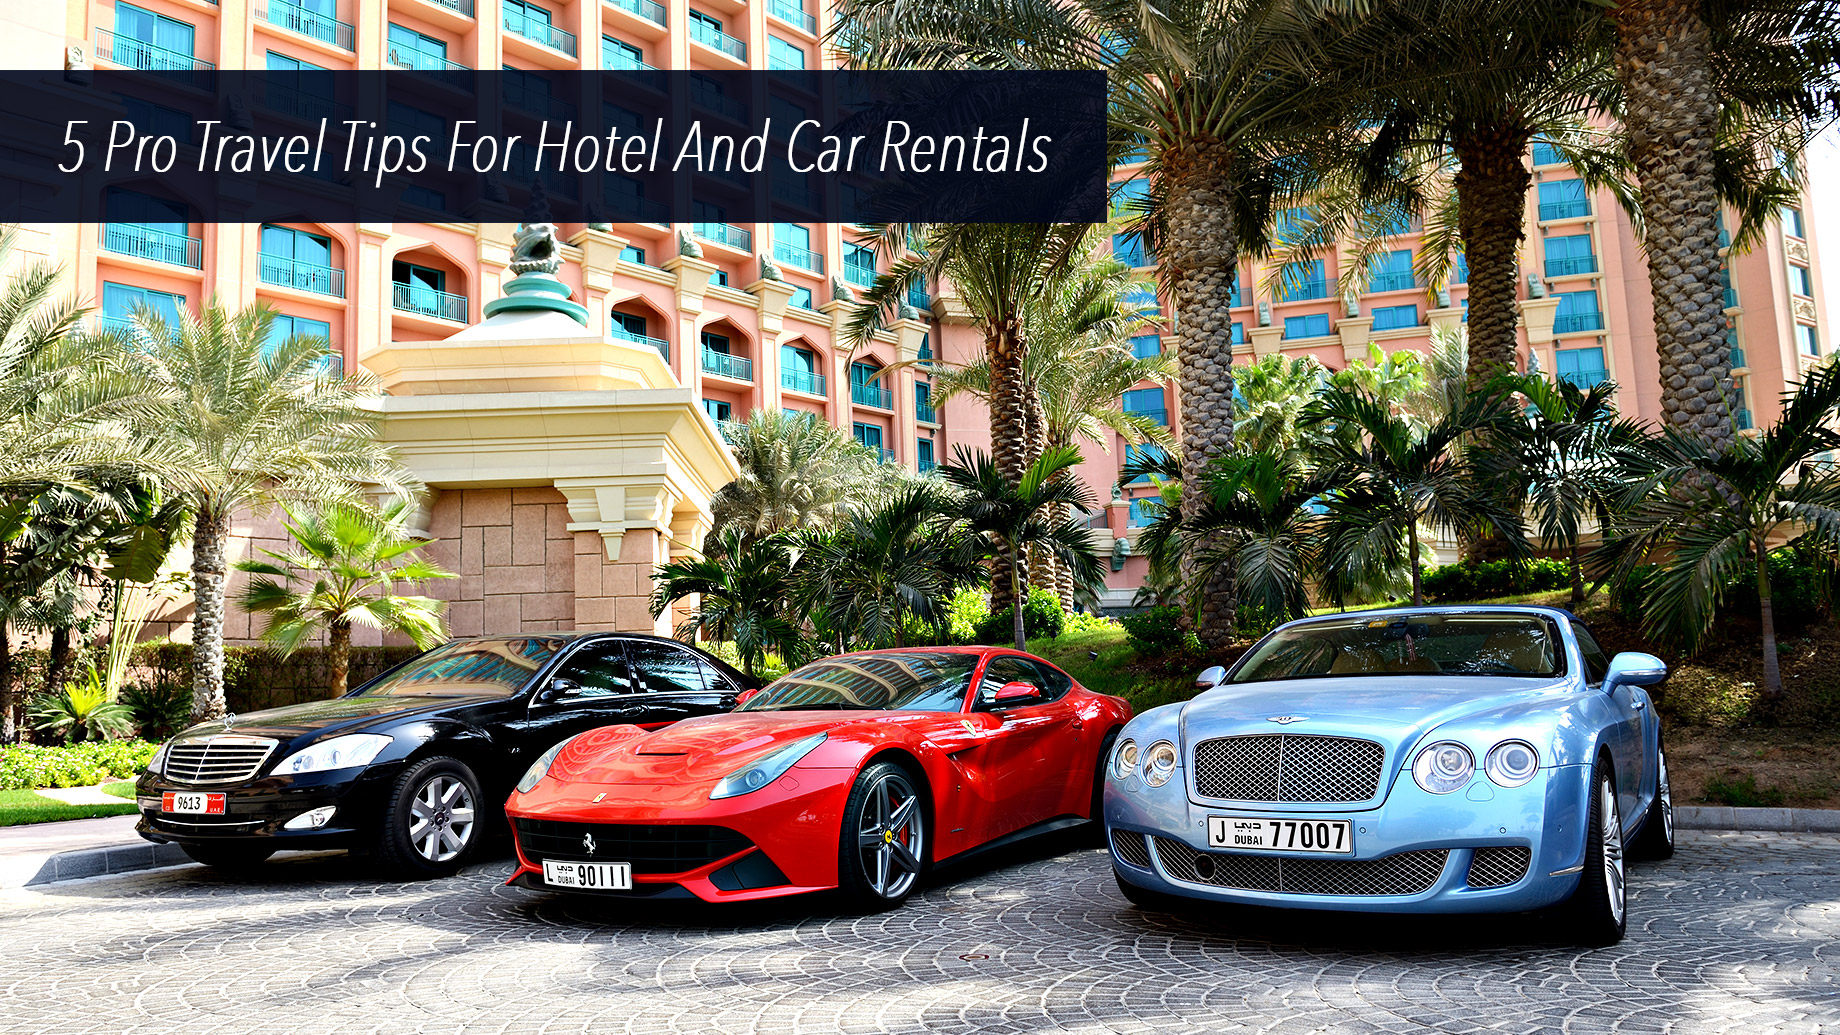 5 Pro Travel Tips For Hotel And Car Rentals